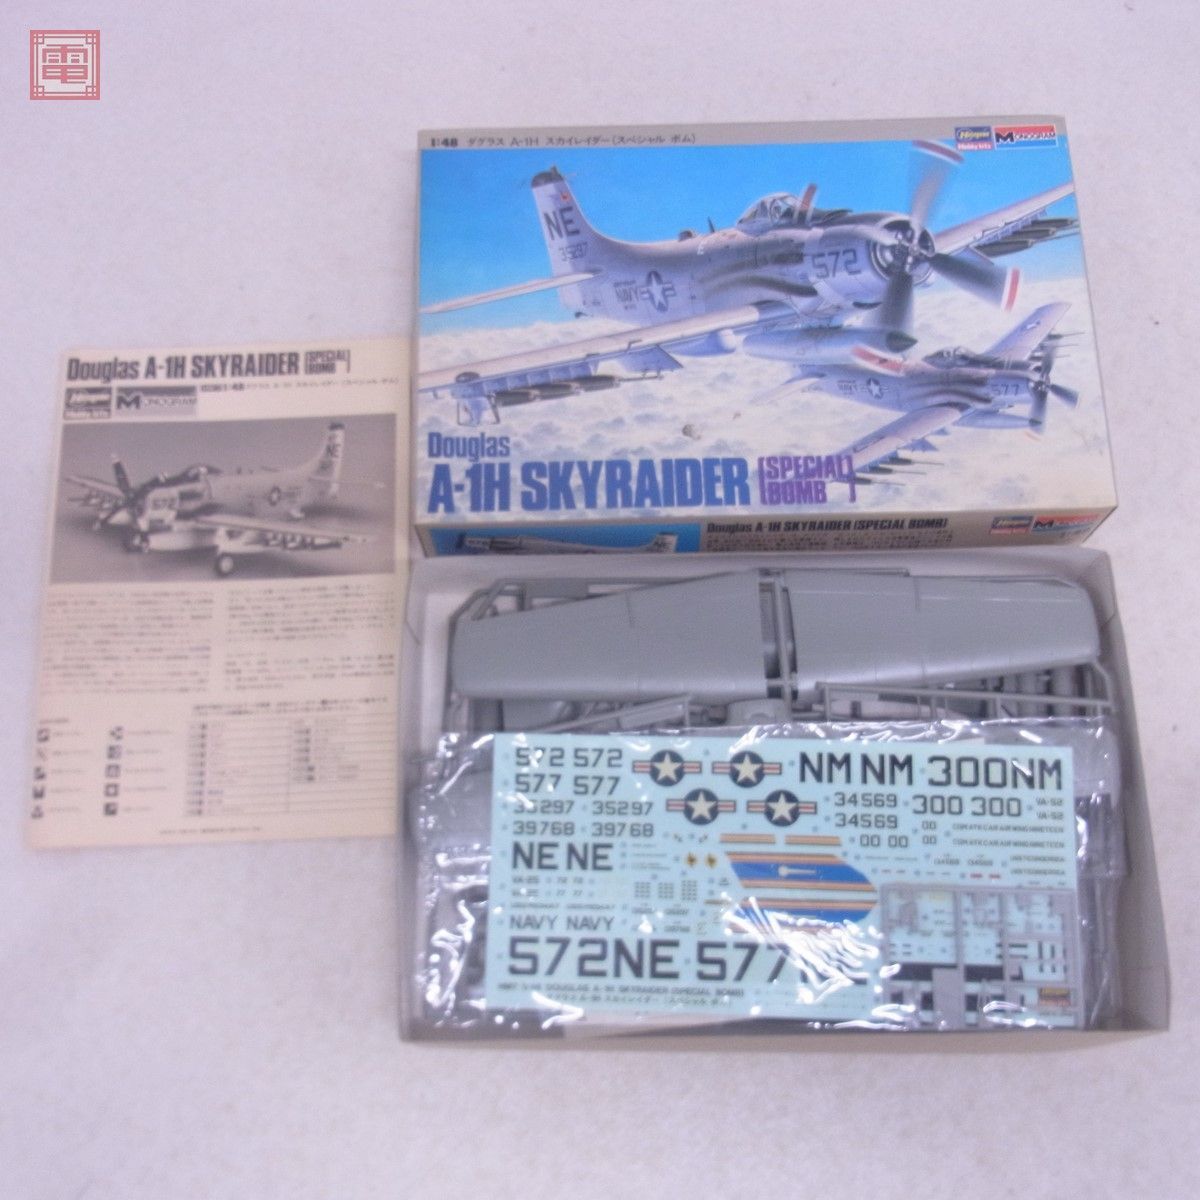  not yet constructed Hasegawa 1/48 Corse aII last mission / Tomcat millenium special etc. together 3 point set Hasegawa[40